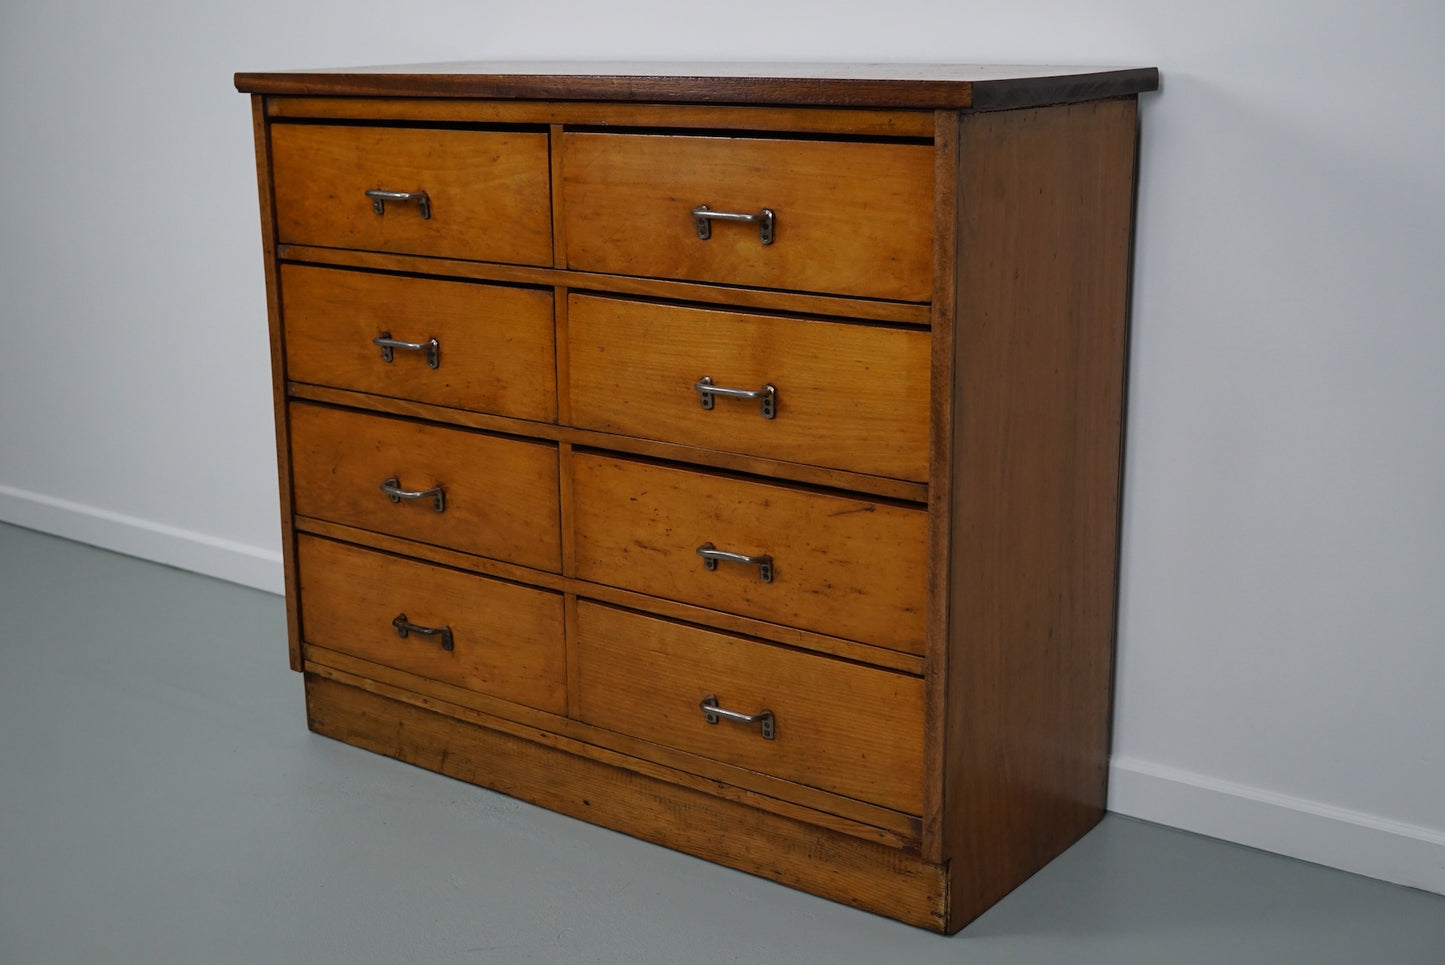 Dutch Industrial Beech Apothecary Cabinet, Mid-20th Century